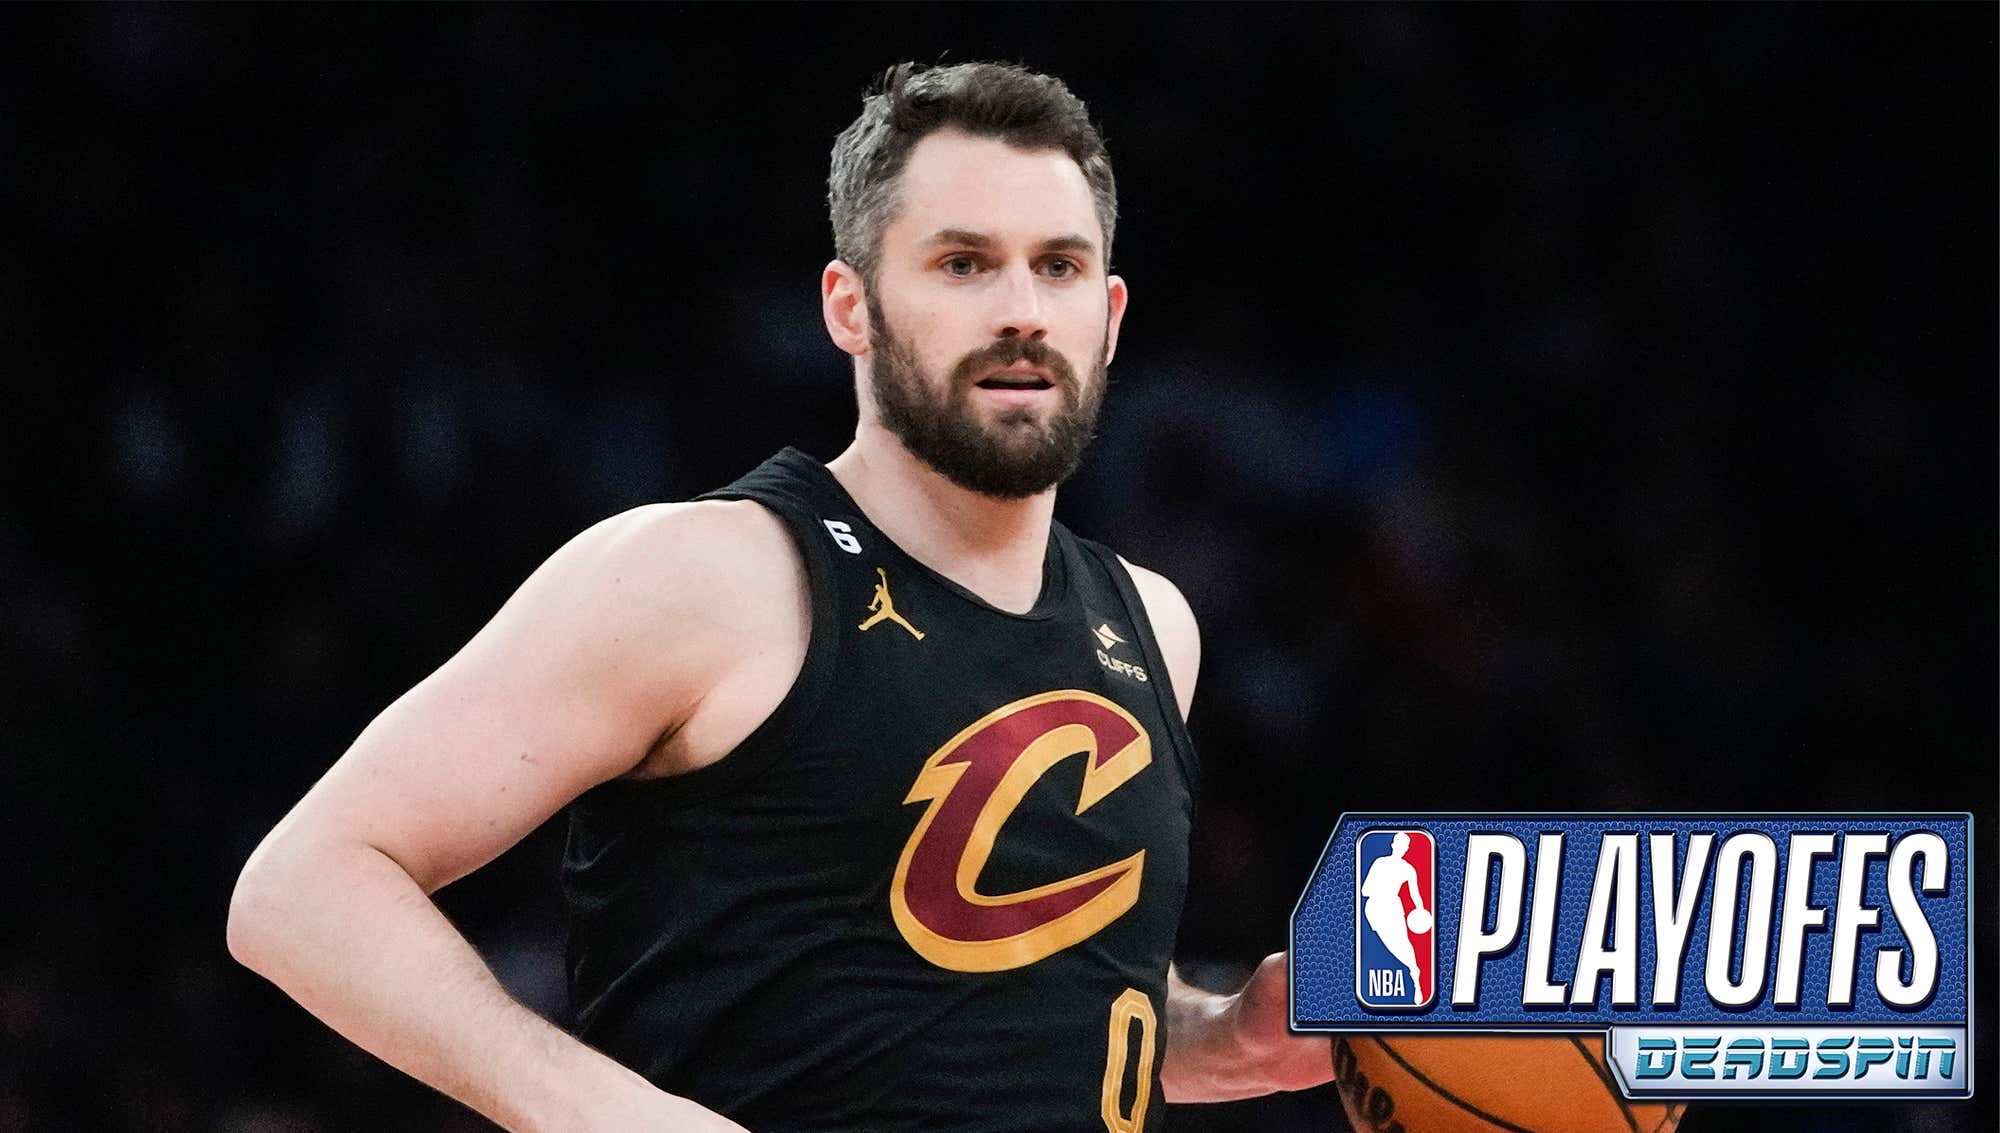 Kevin Love is still a contributor